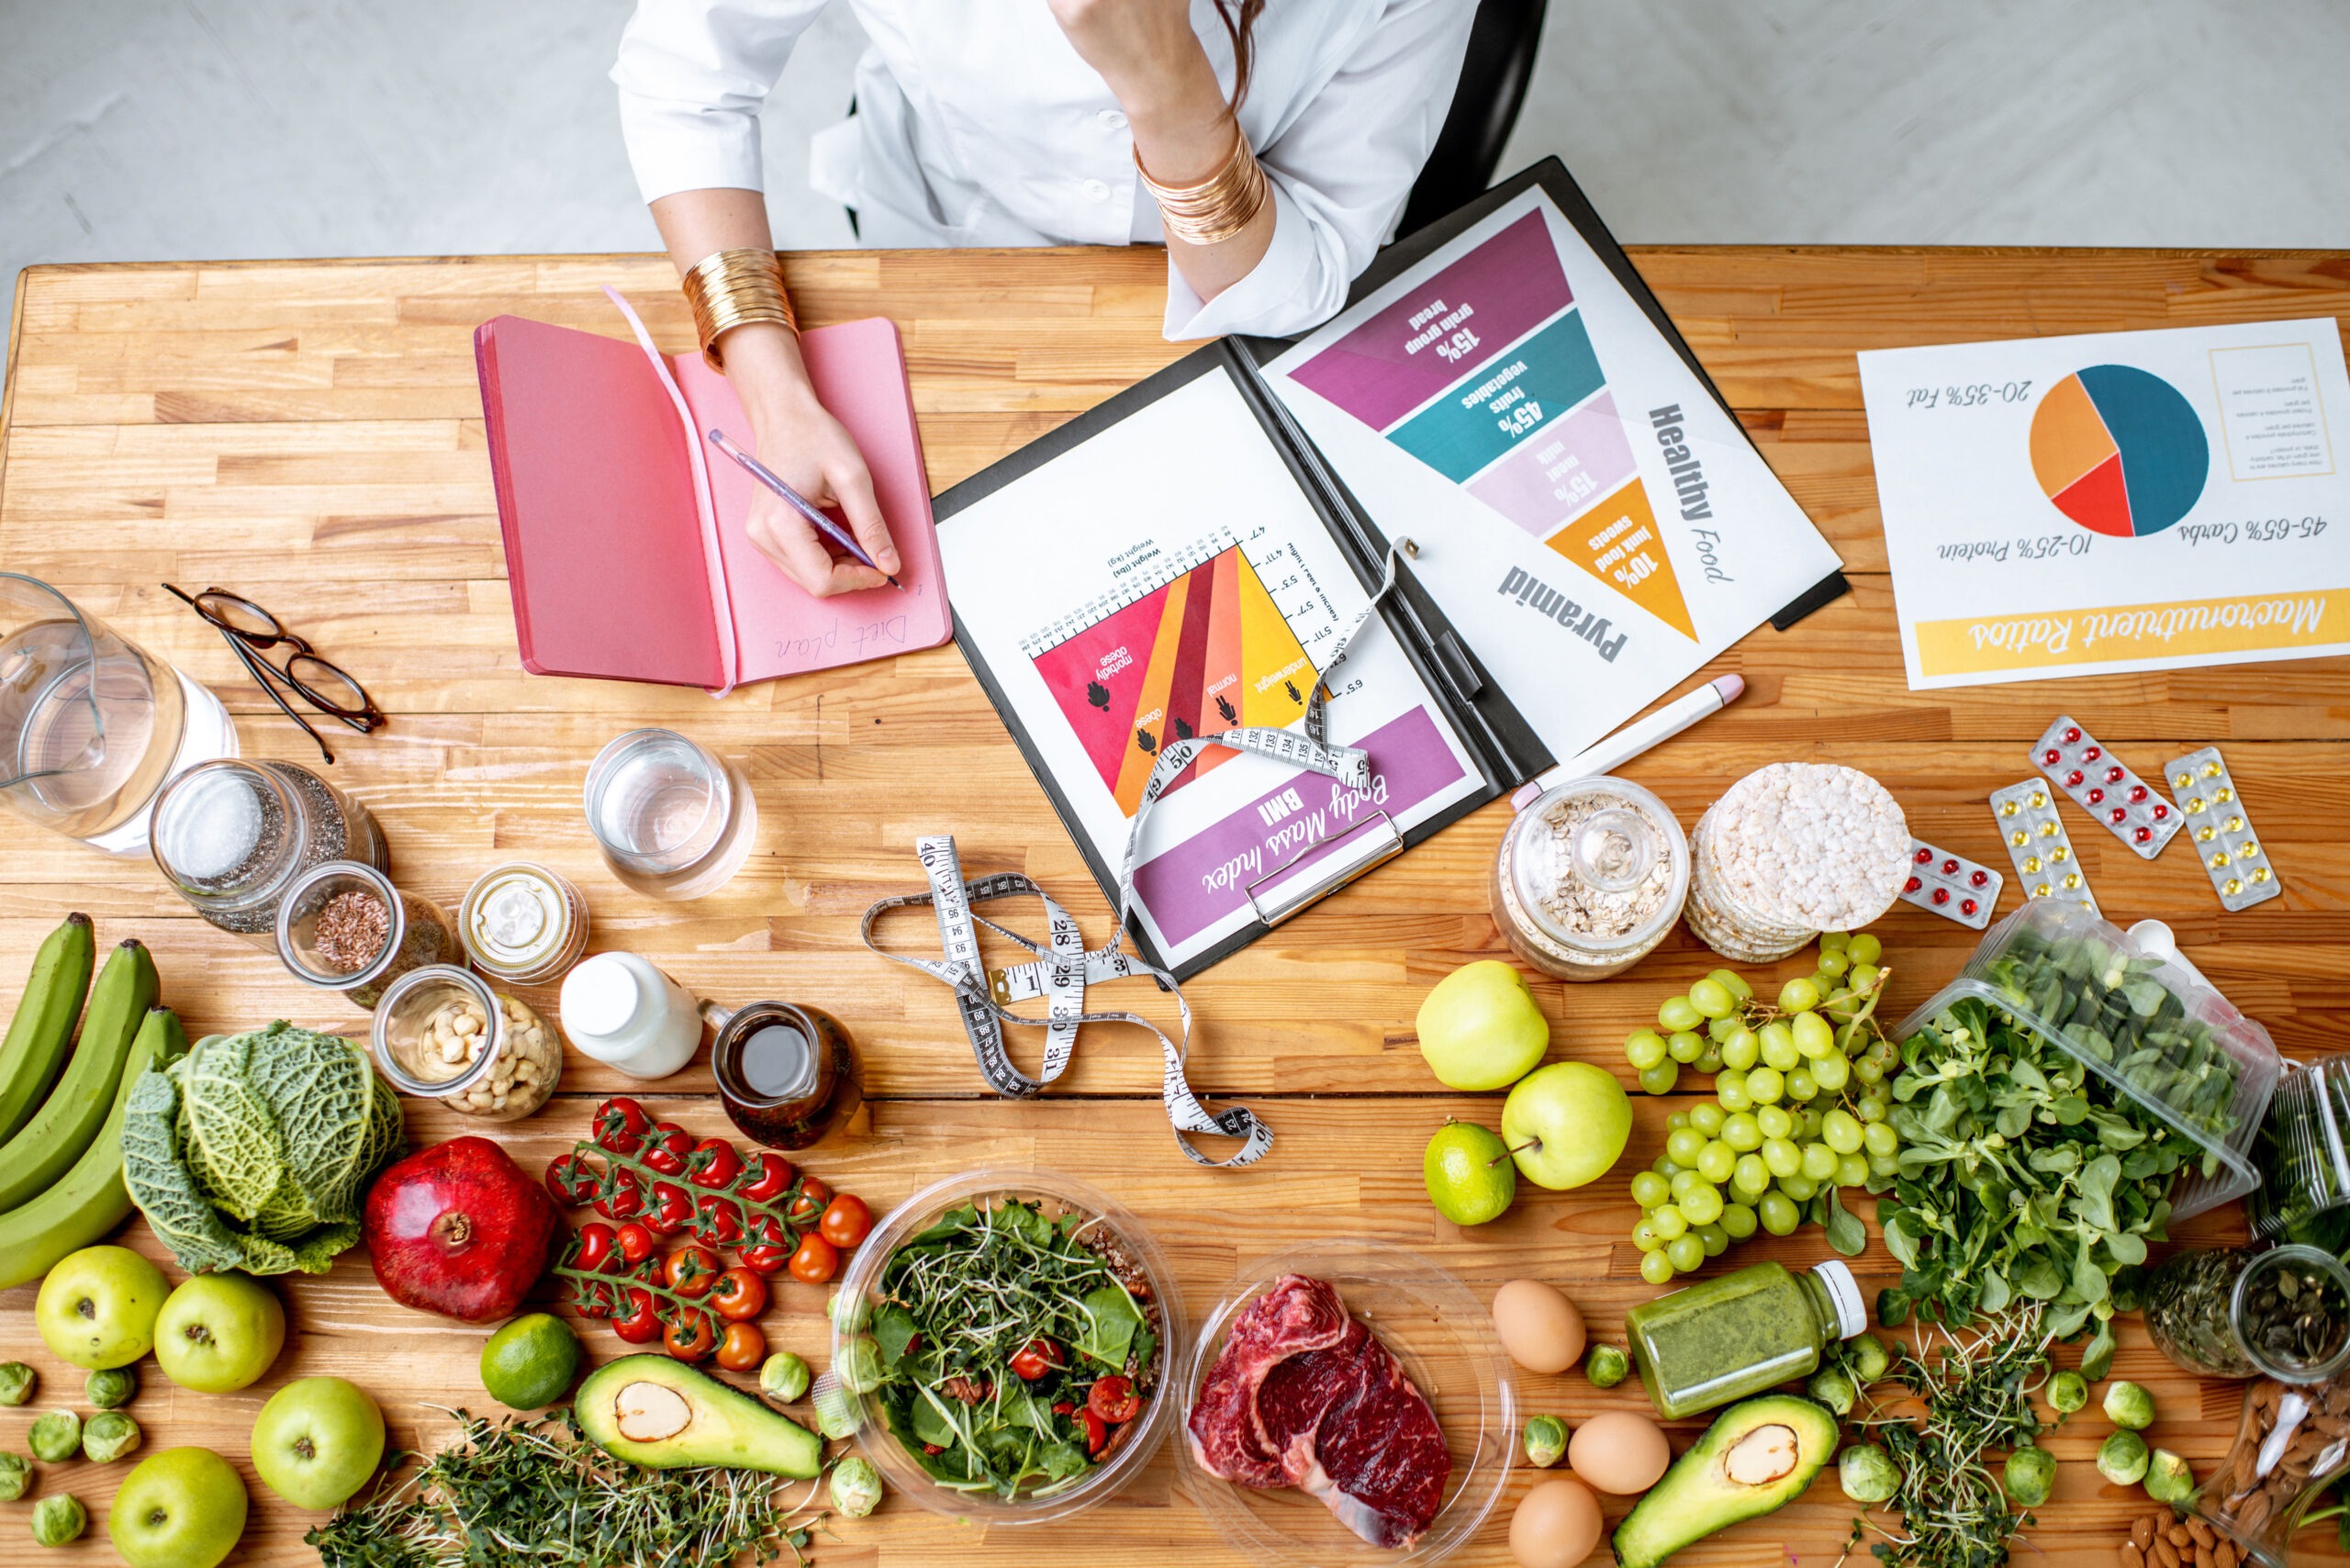 A nutritionist's desk bustling with activity, featuring a blend of healthy foods and dietary planning tools.